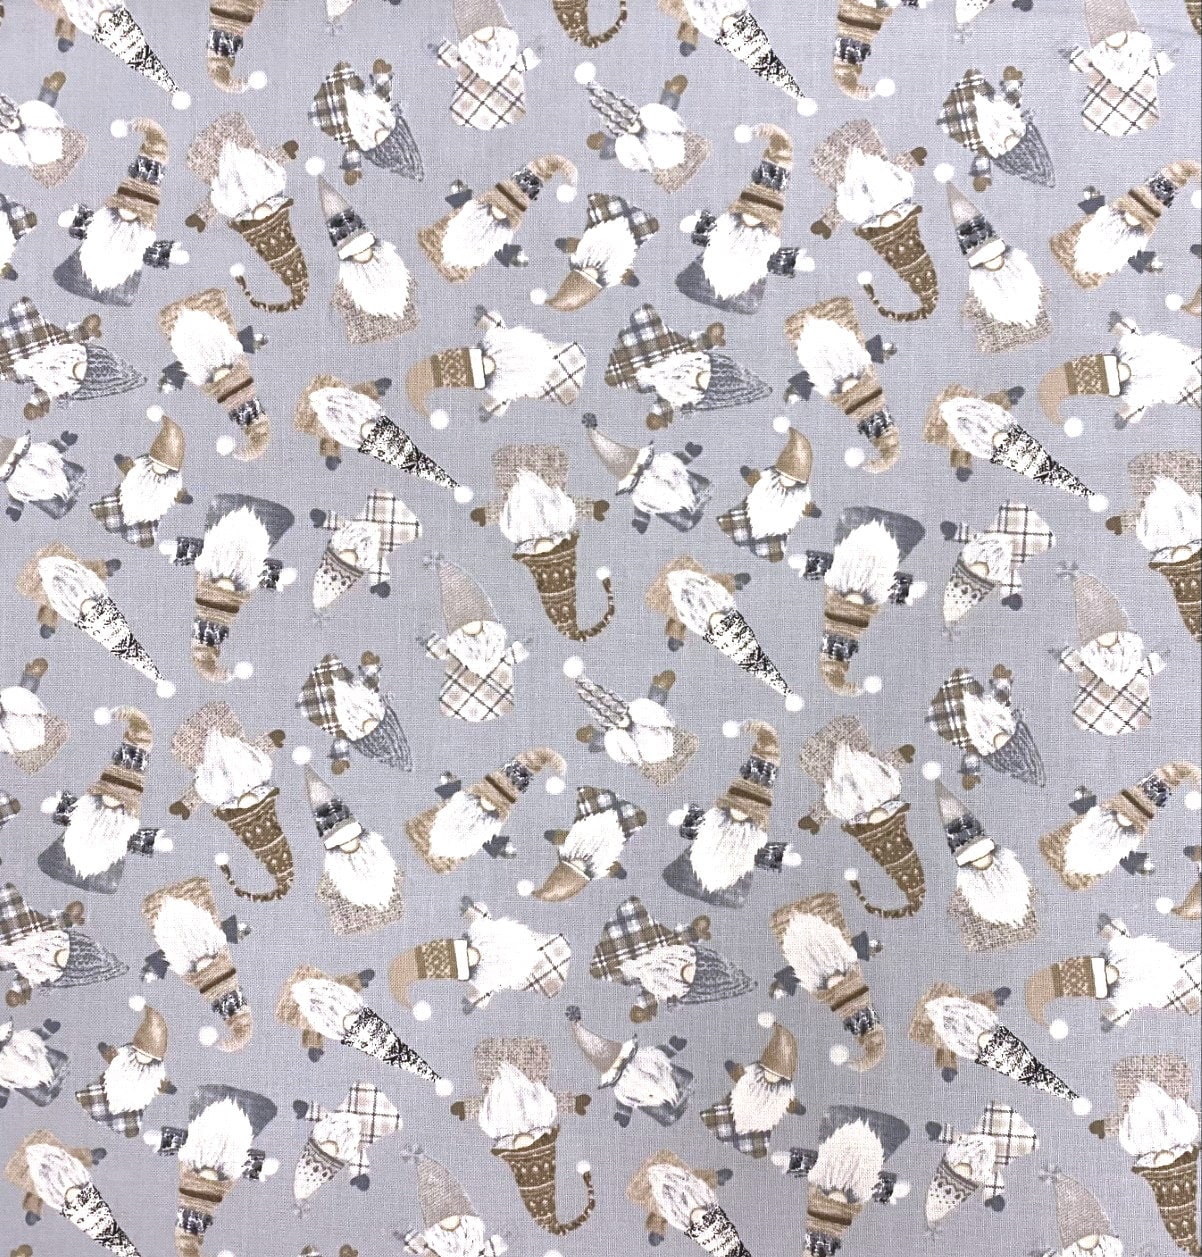 Winter Gnomes Fabric Fabric by the Yardmetercotton 